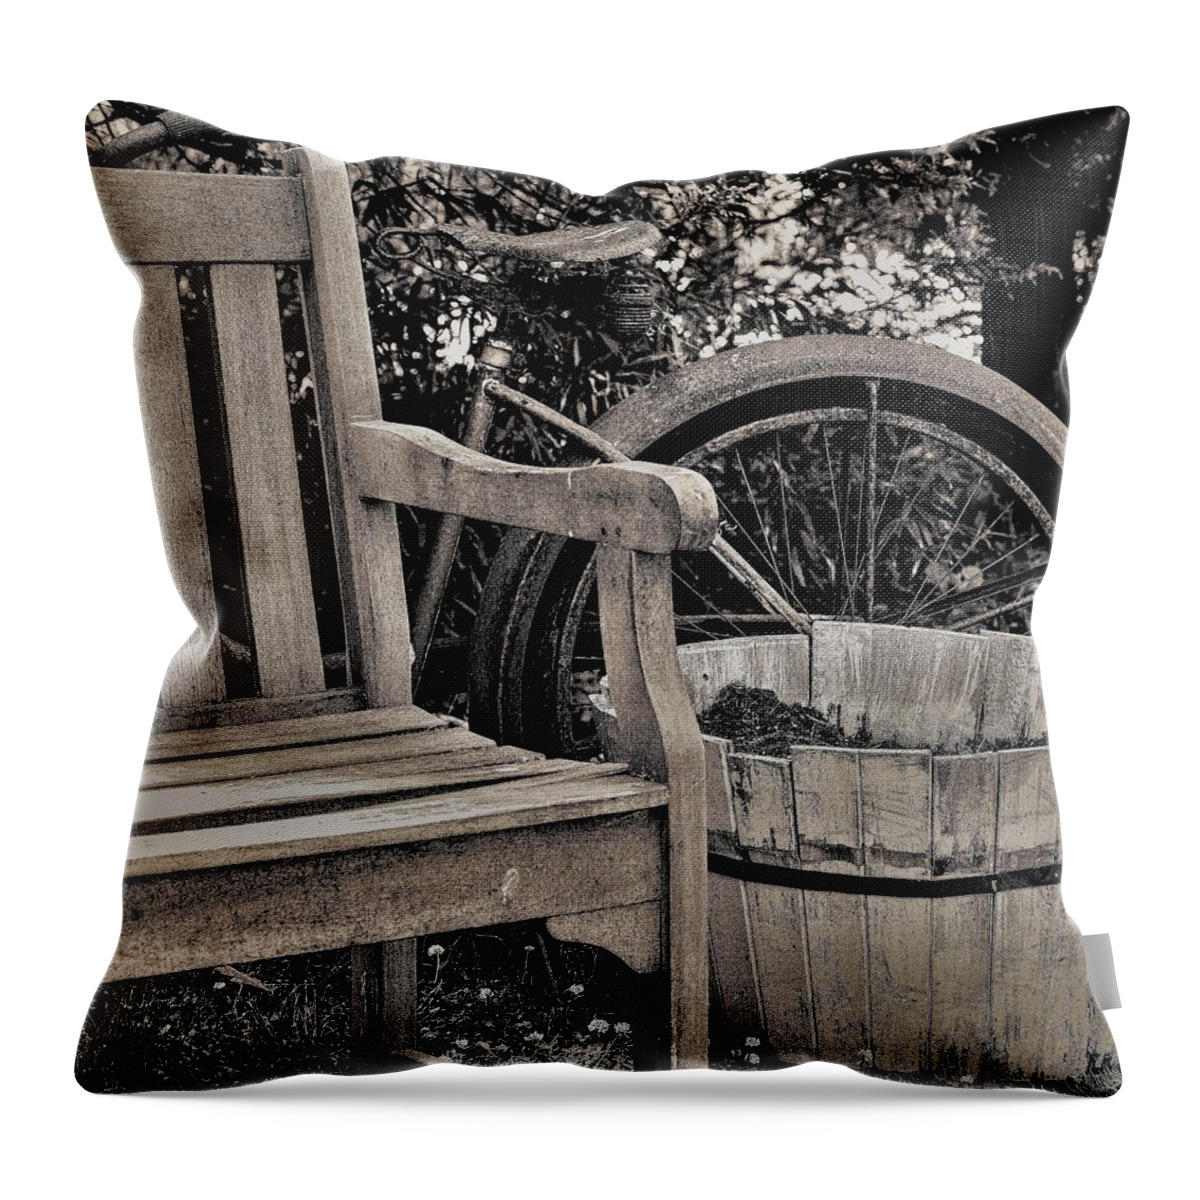 Bicycle Bench B&w Throw Pillow featuring the photograph Bicycle Bench4 by John Linnemeyer